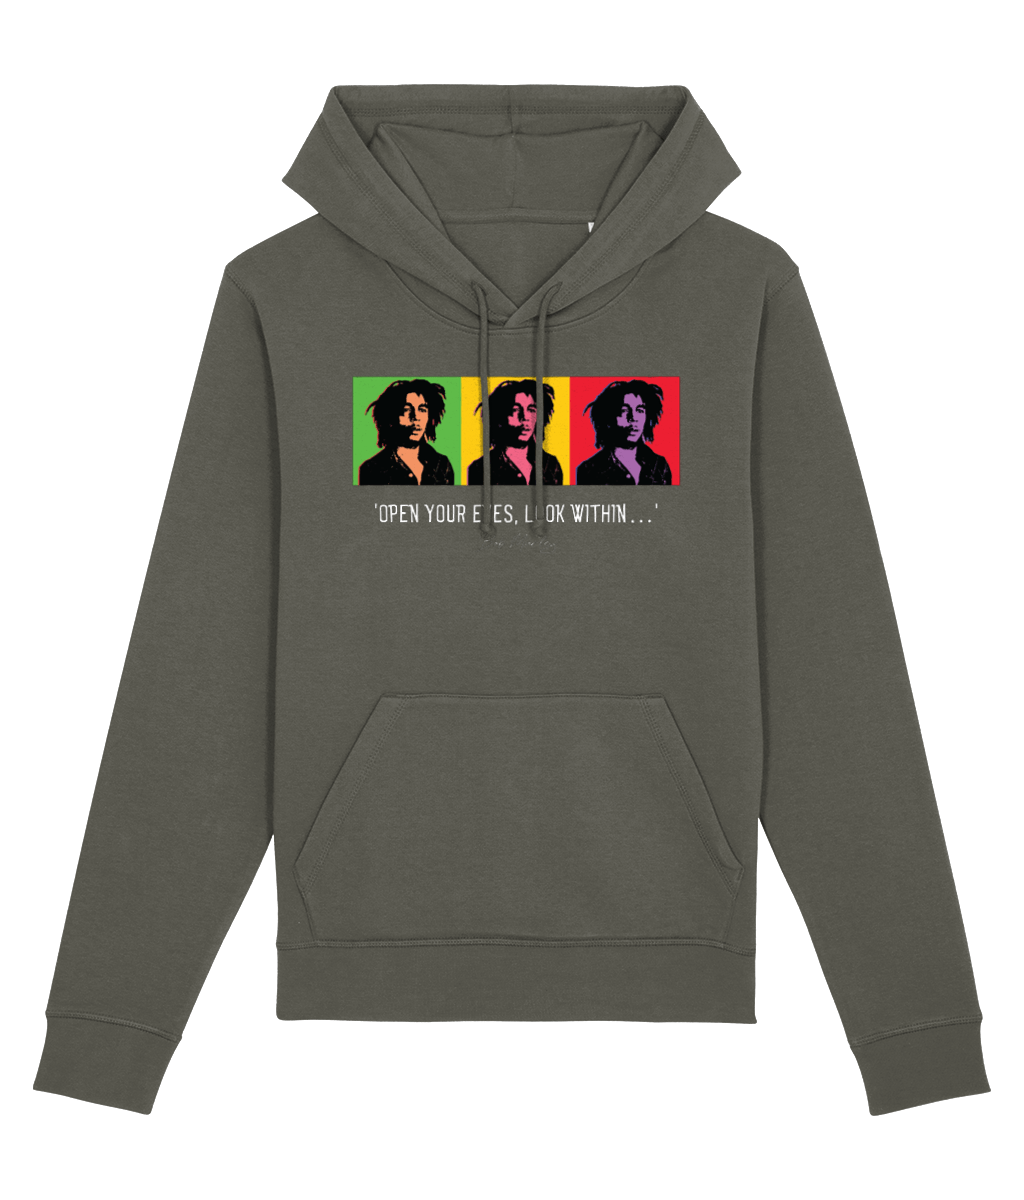 Famous Quotes 'Bob Marley' Organic Cotton Hoodie - Caribbean Gift